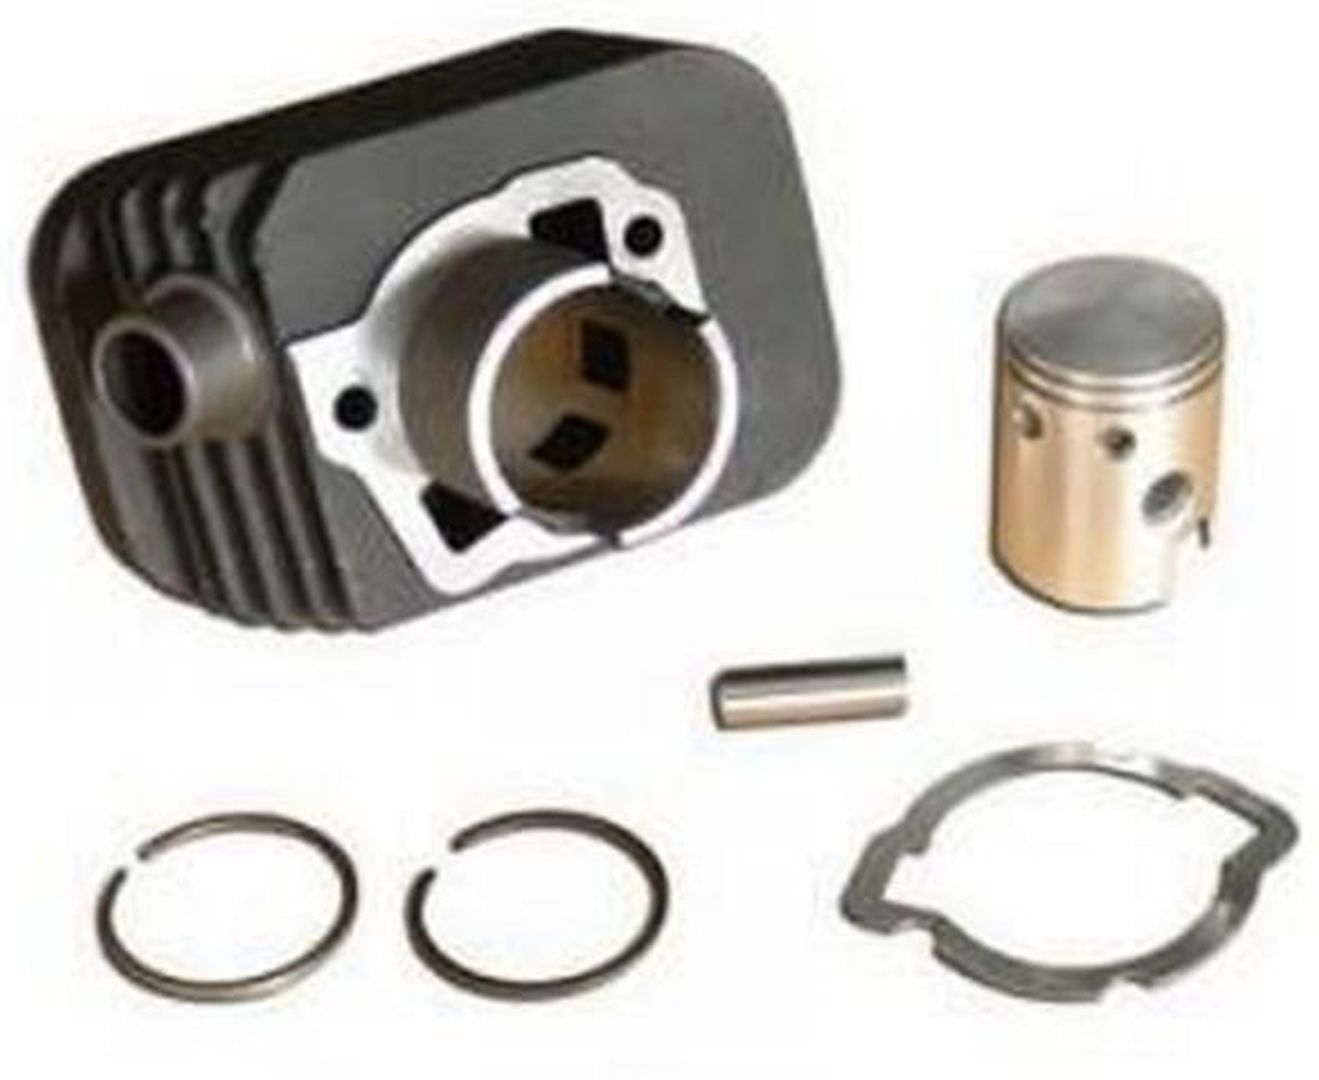 Piaggio cylindre avec piston complet 38.4 mm axe 12 mm pour Ciao SI